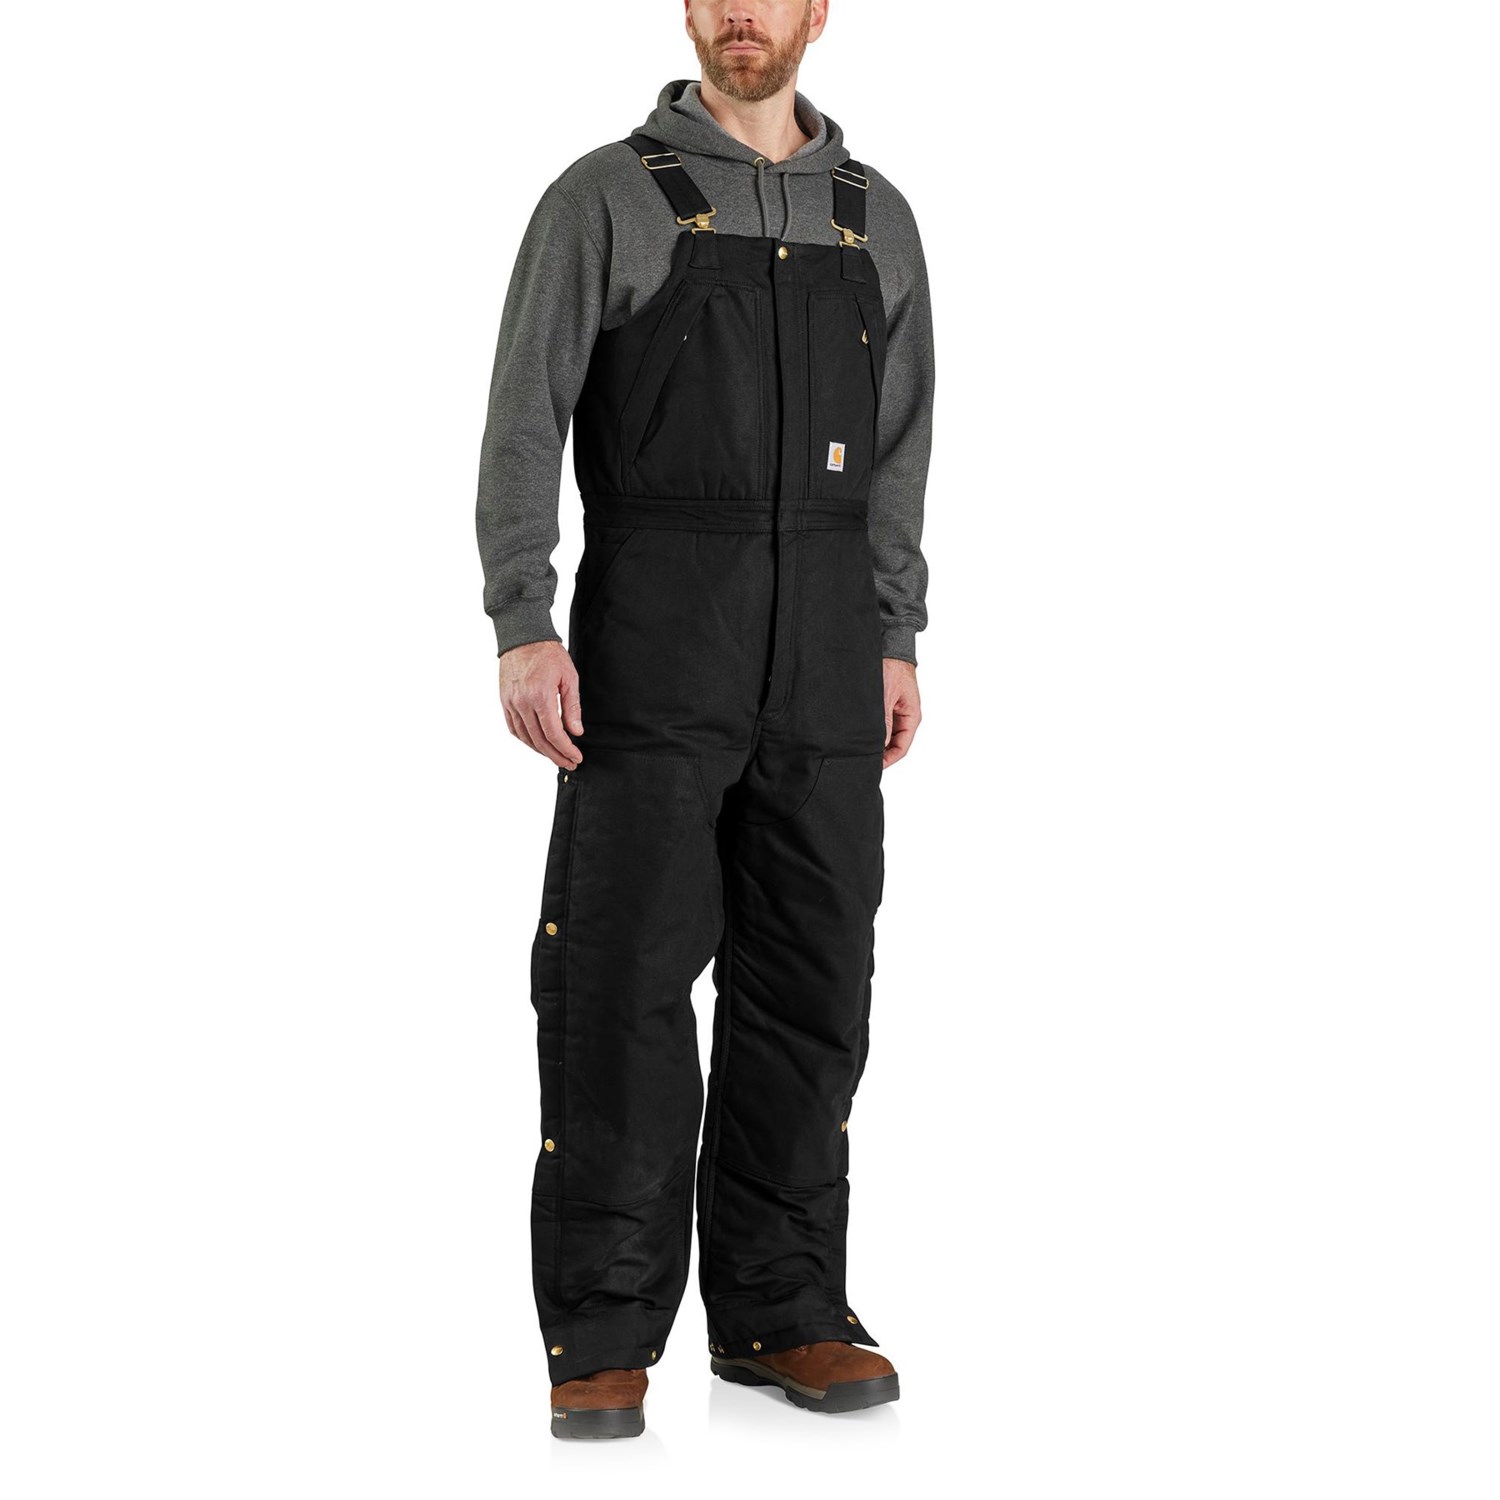 Carhartt 105470 Loose Fit Firm Duck Bib Overalls - Insulated, Factory Seconds